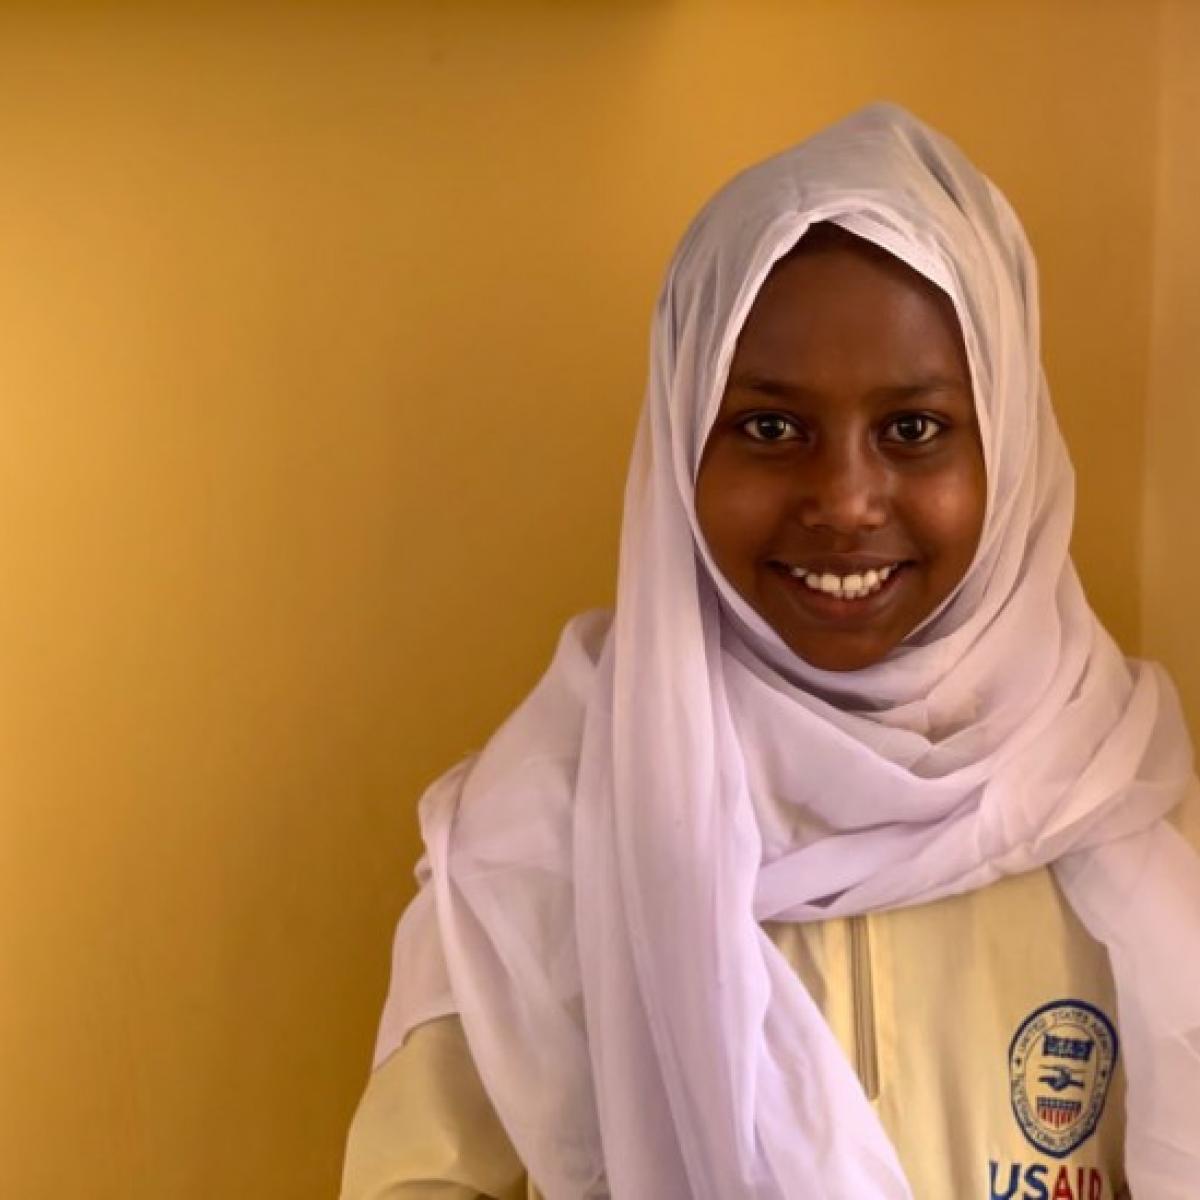 Fatma, 13, has been able to return to school through USAID assistance.